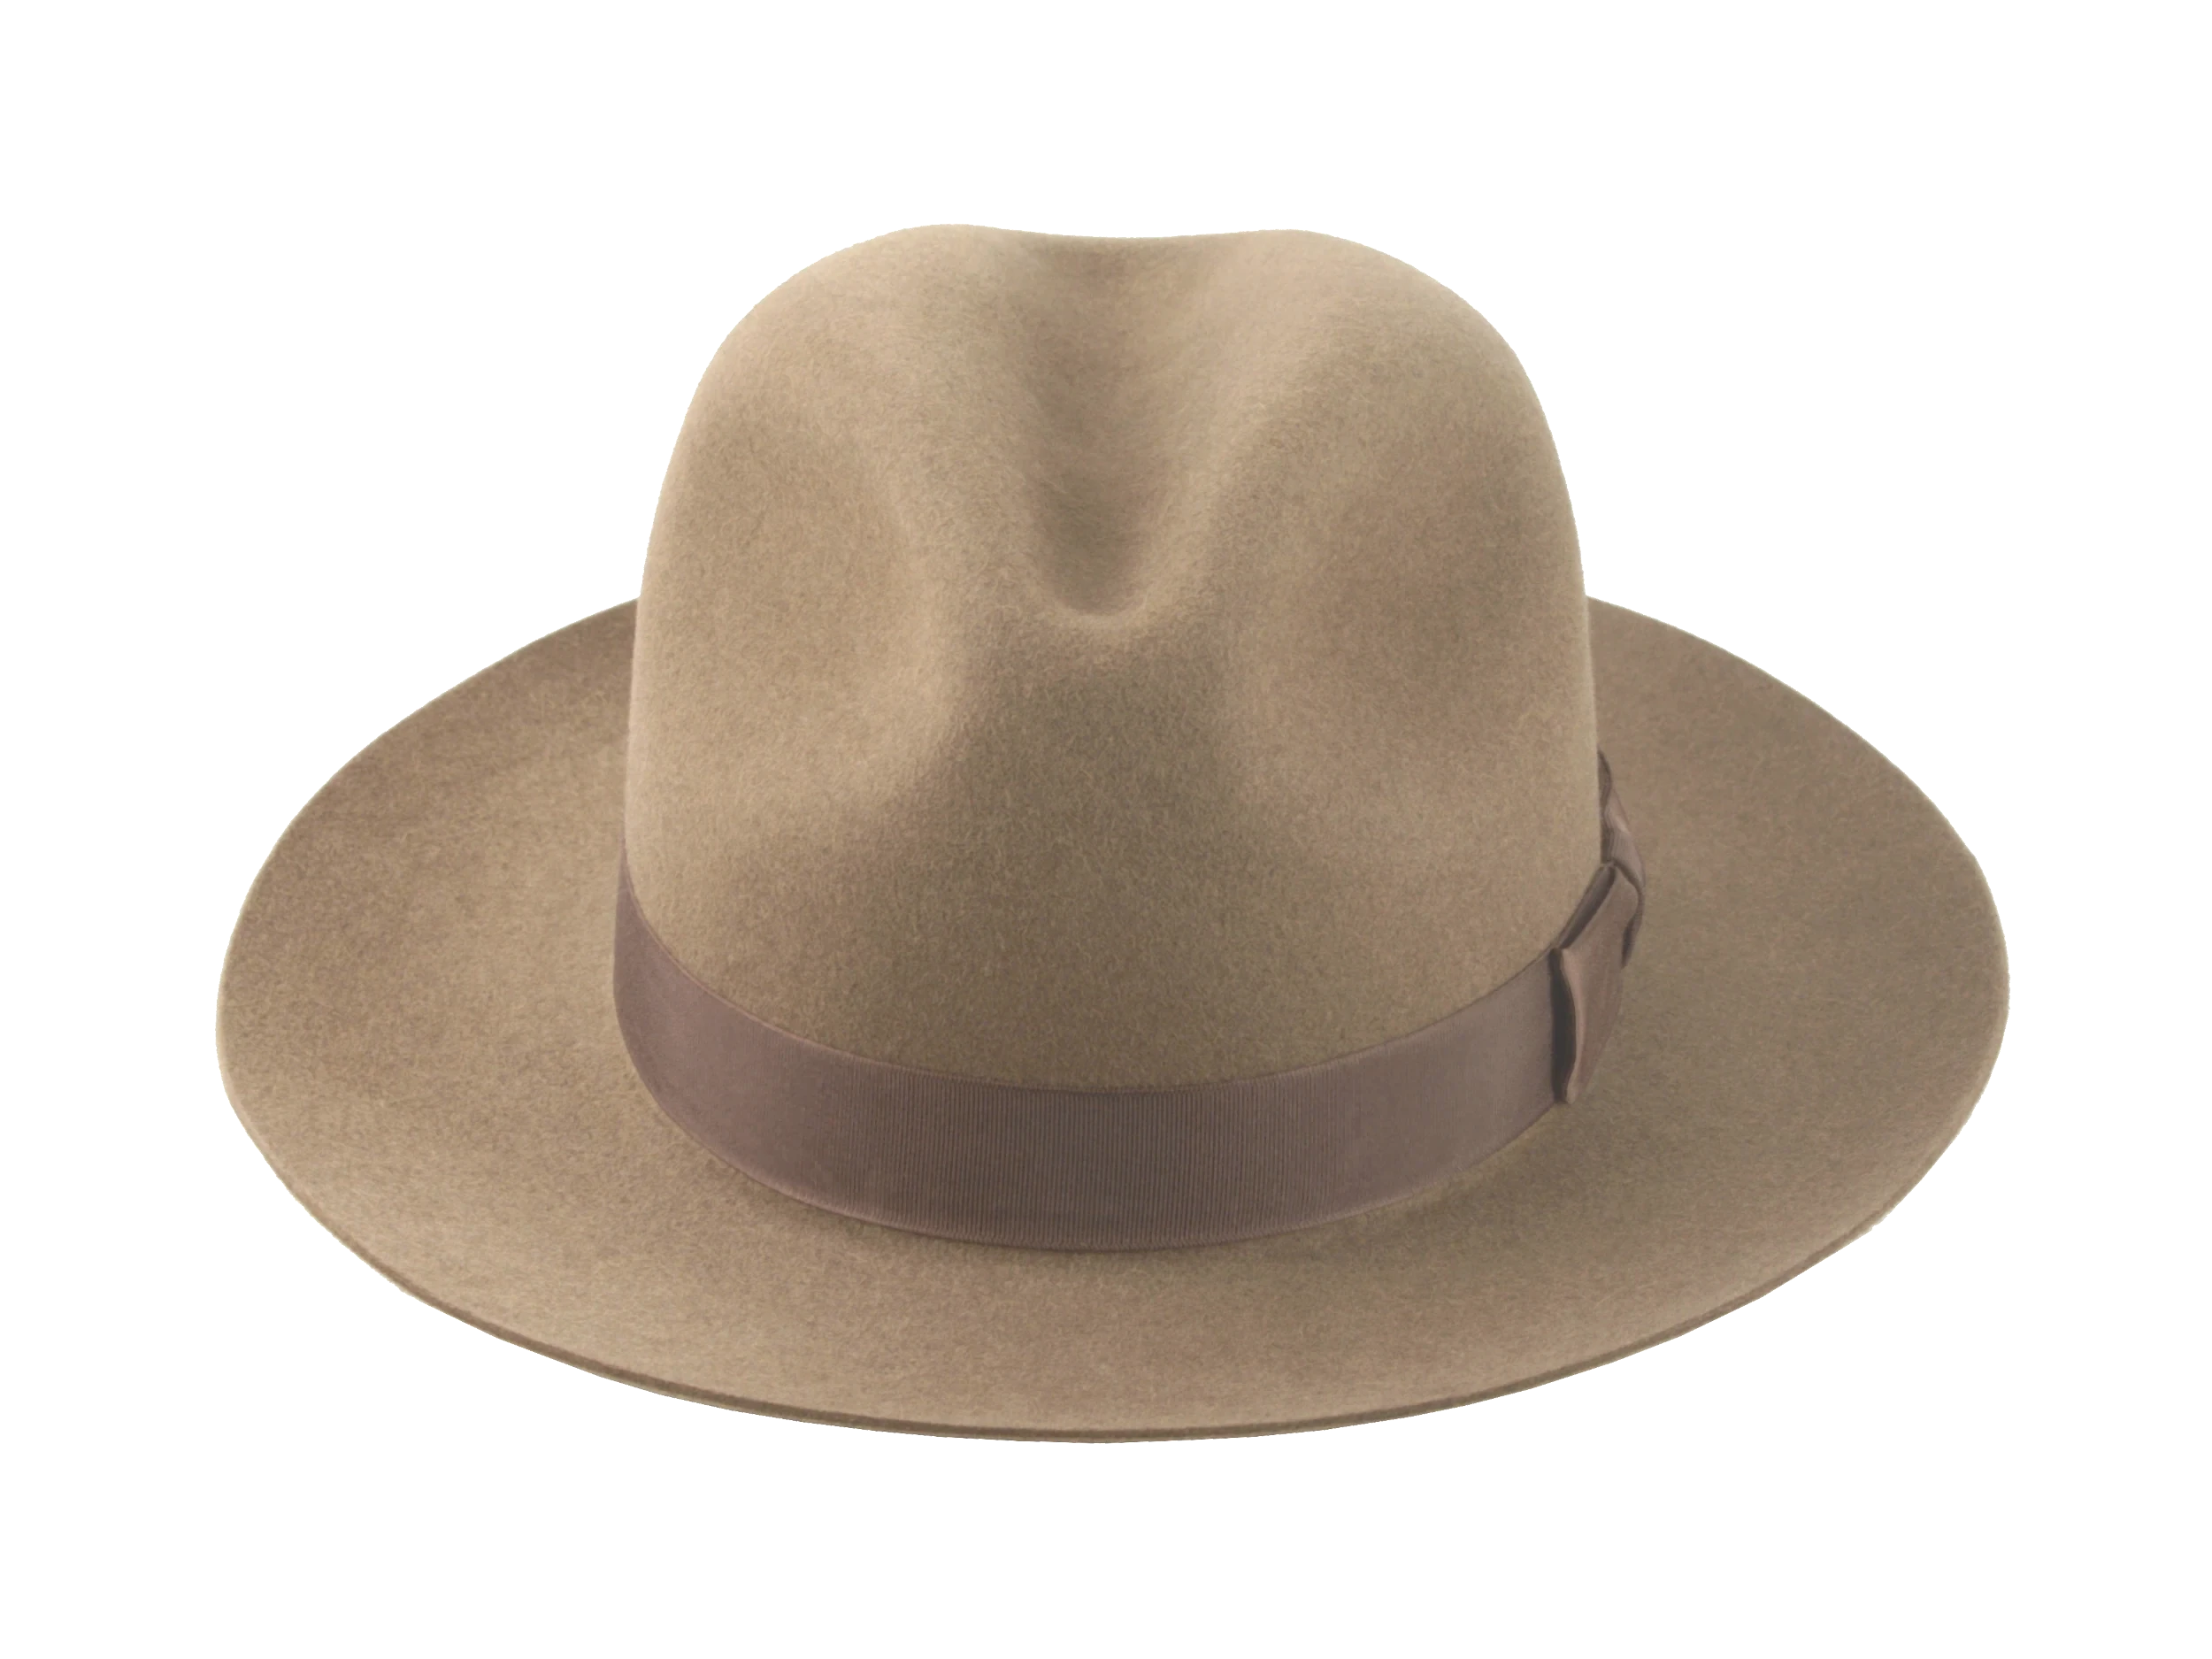 The Brando: Full view of the classic style dress fedora, emphasizing its timeless silhouette | Agnoulita Hats